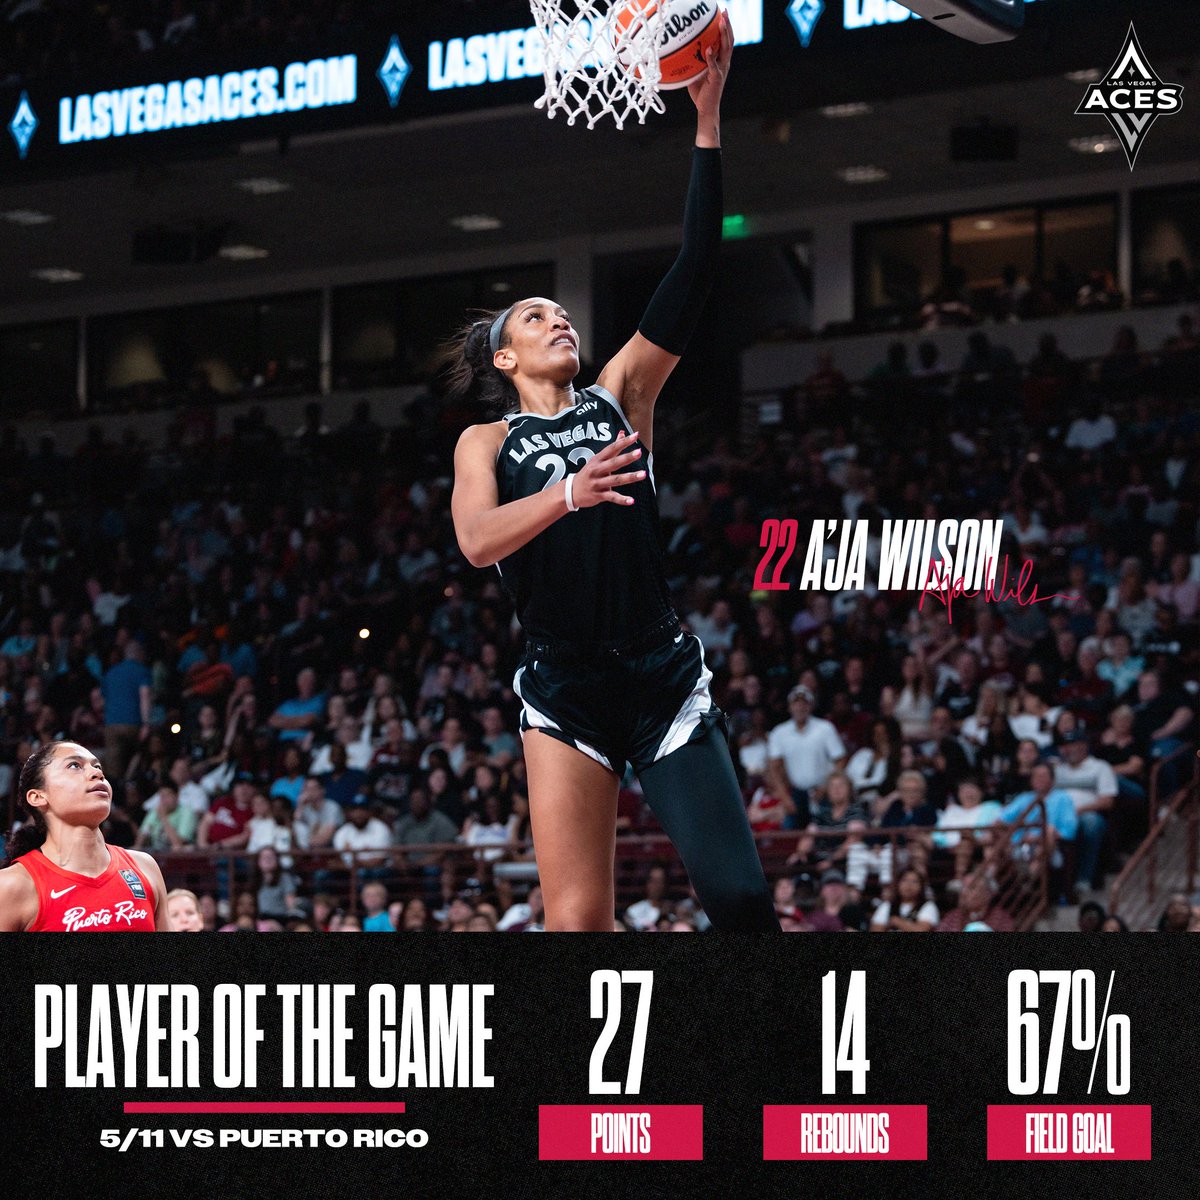 you know she had to double itttt ☺️ 27 PTS // 14 REB // 67% FG #ALLINLV